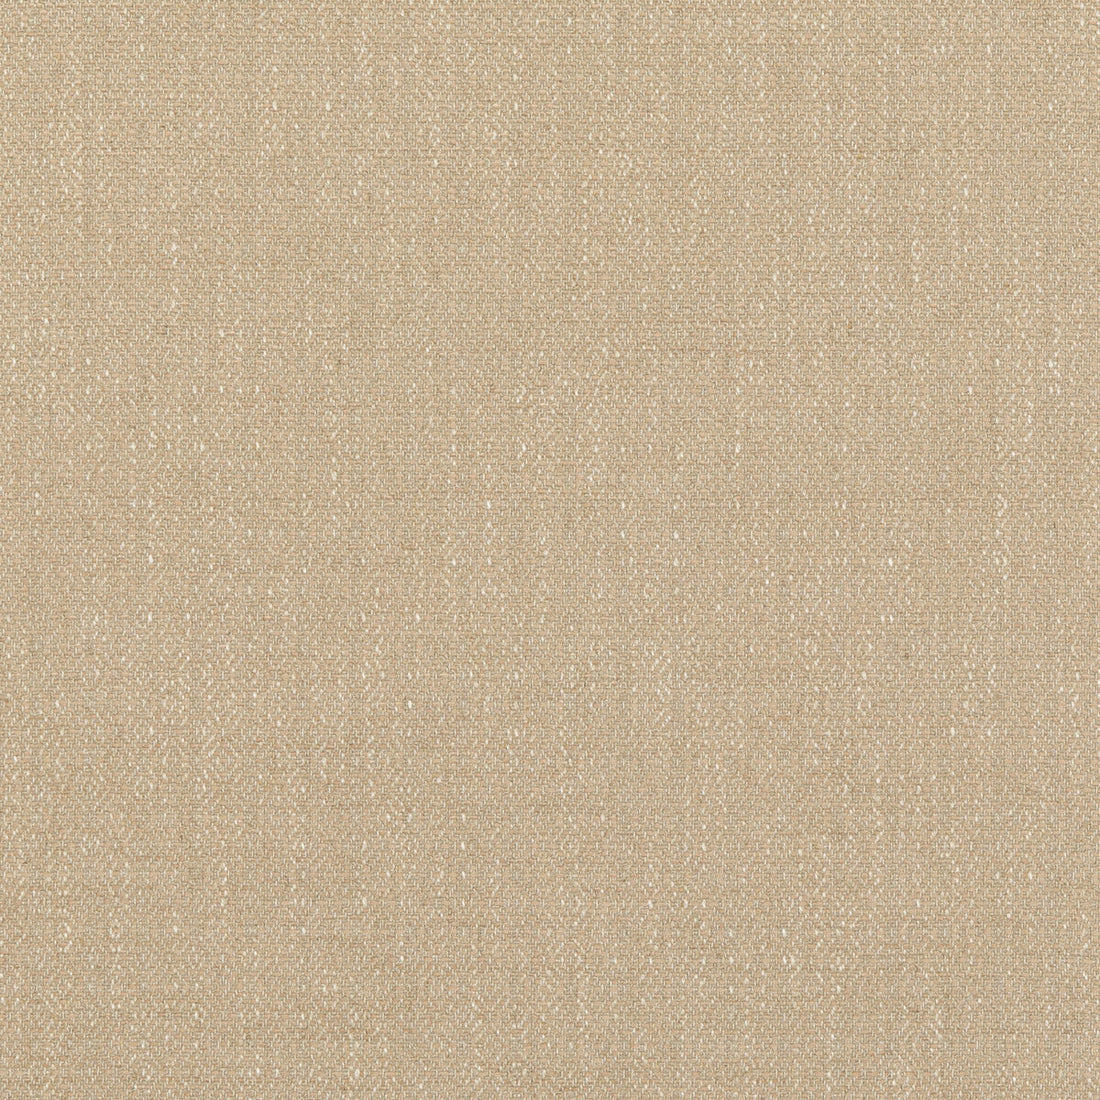 Kenton fabric in parchment color - pattern BF10868.225.0 - by G P &amp; J Baker in the Essential Colours II collection